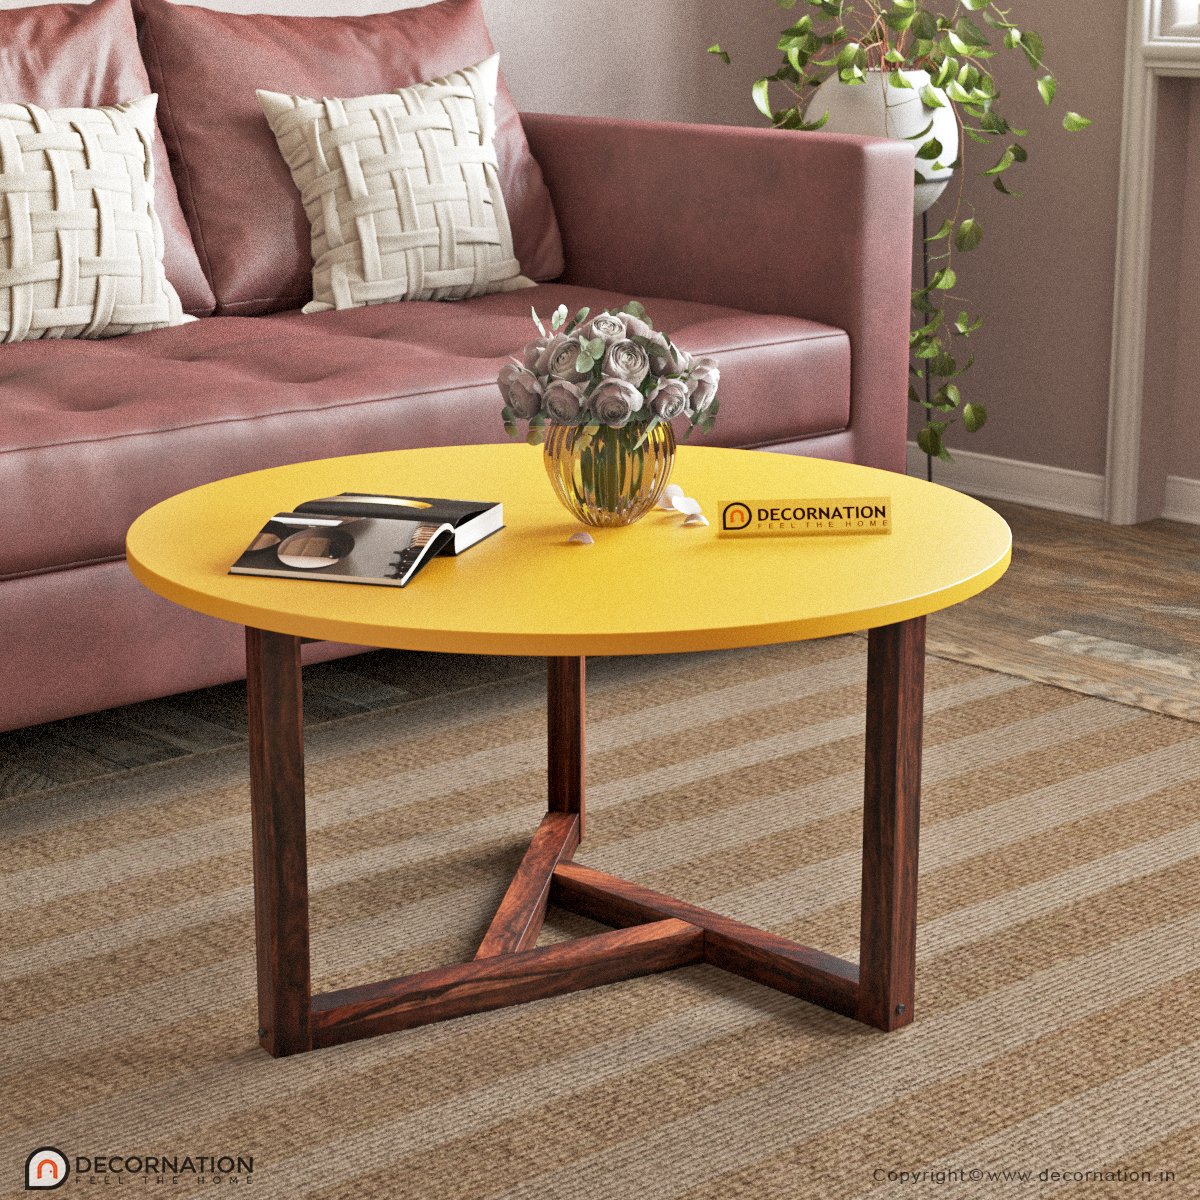 Lillie Round Coffee Table – Yellow